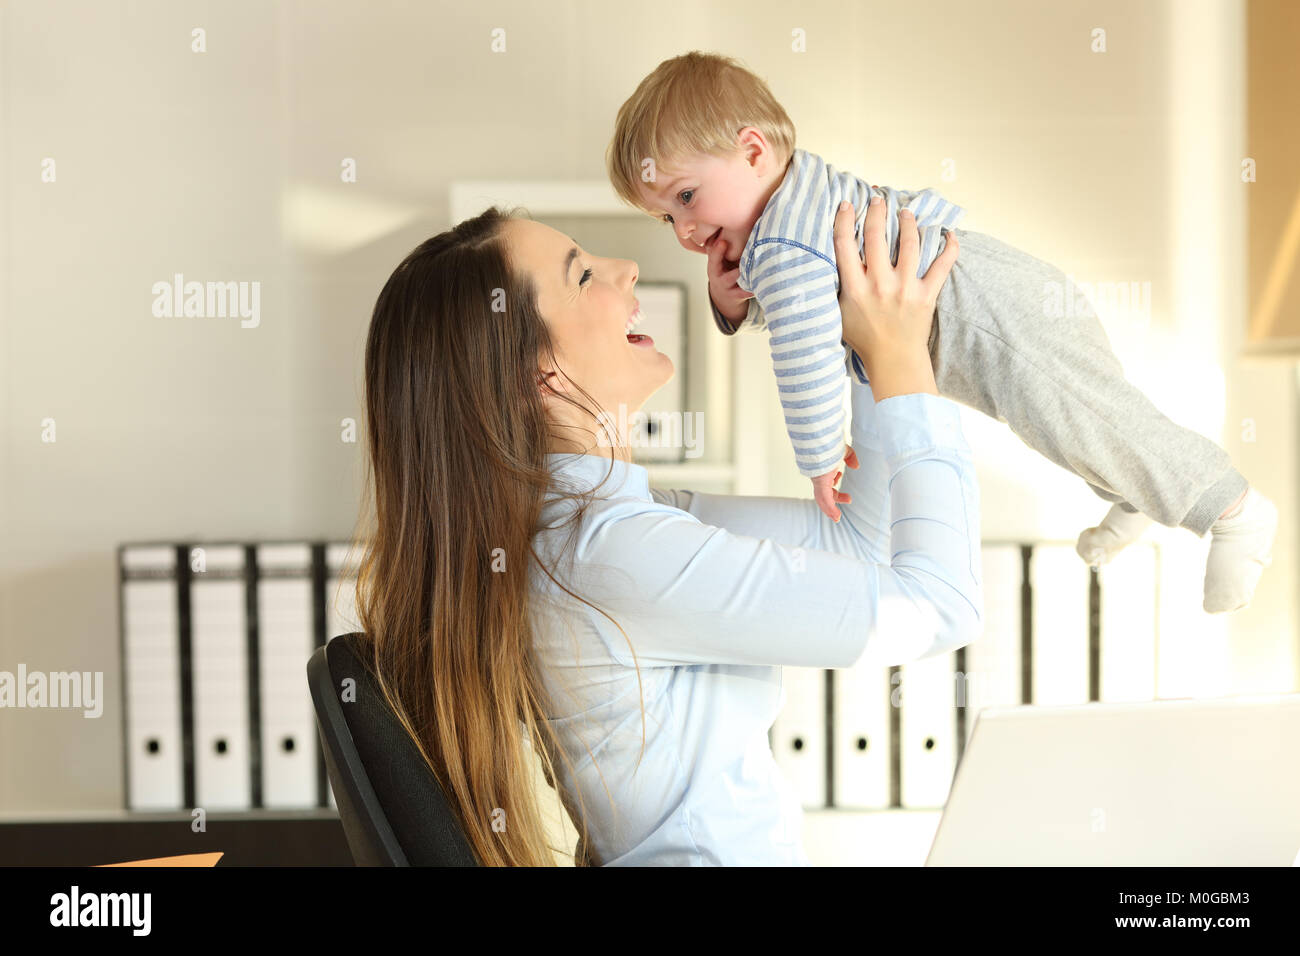 Side view portrait of a happy working mother raising her baby son at office Stock Photo